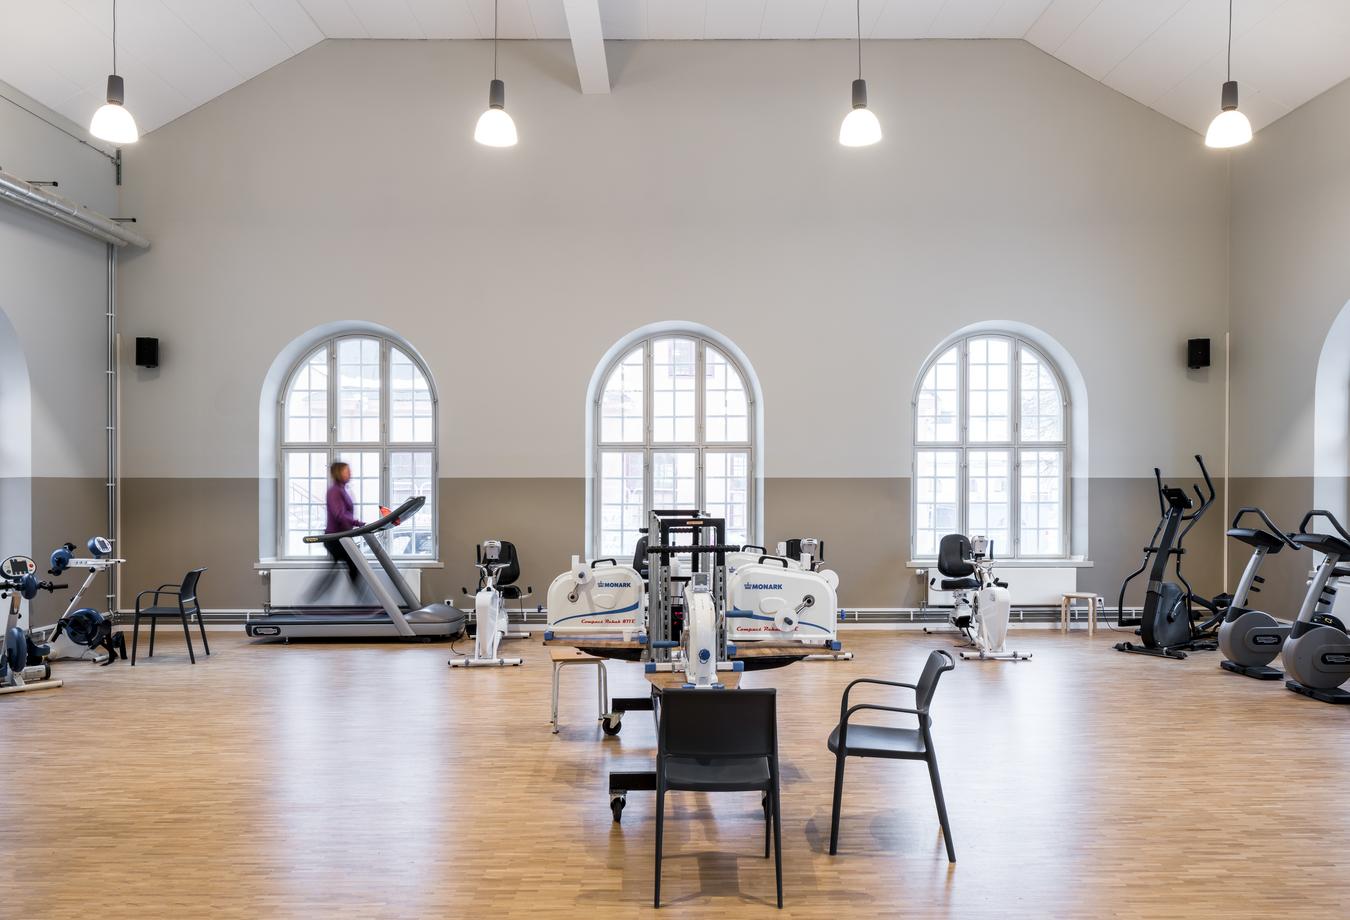 Gym with high ceilings. Photo